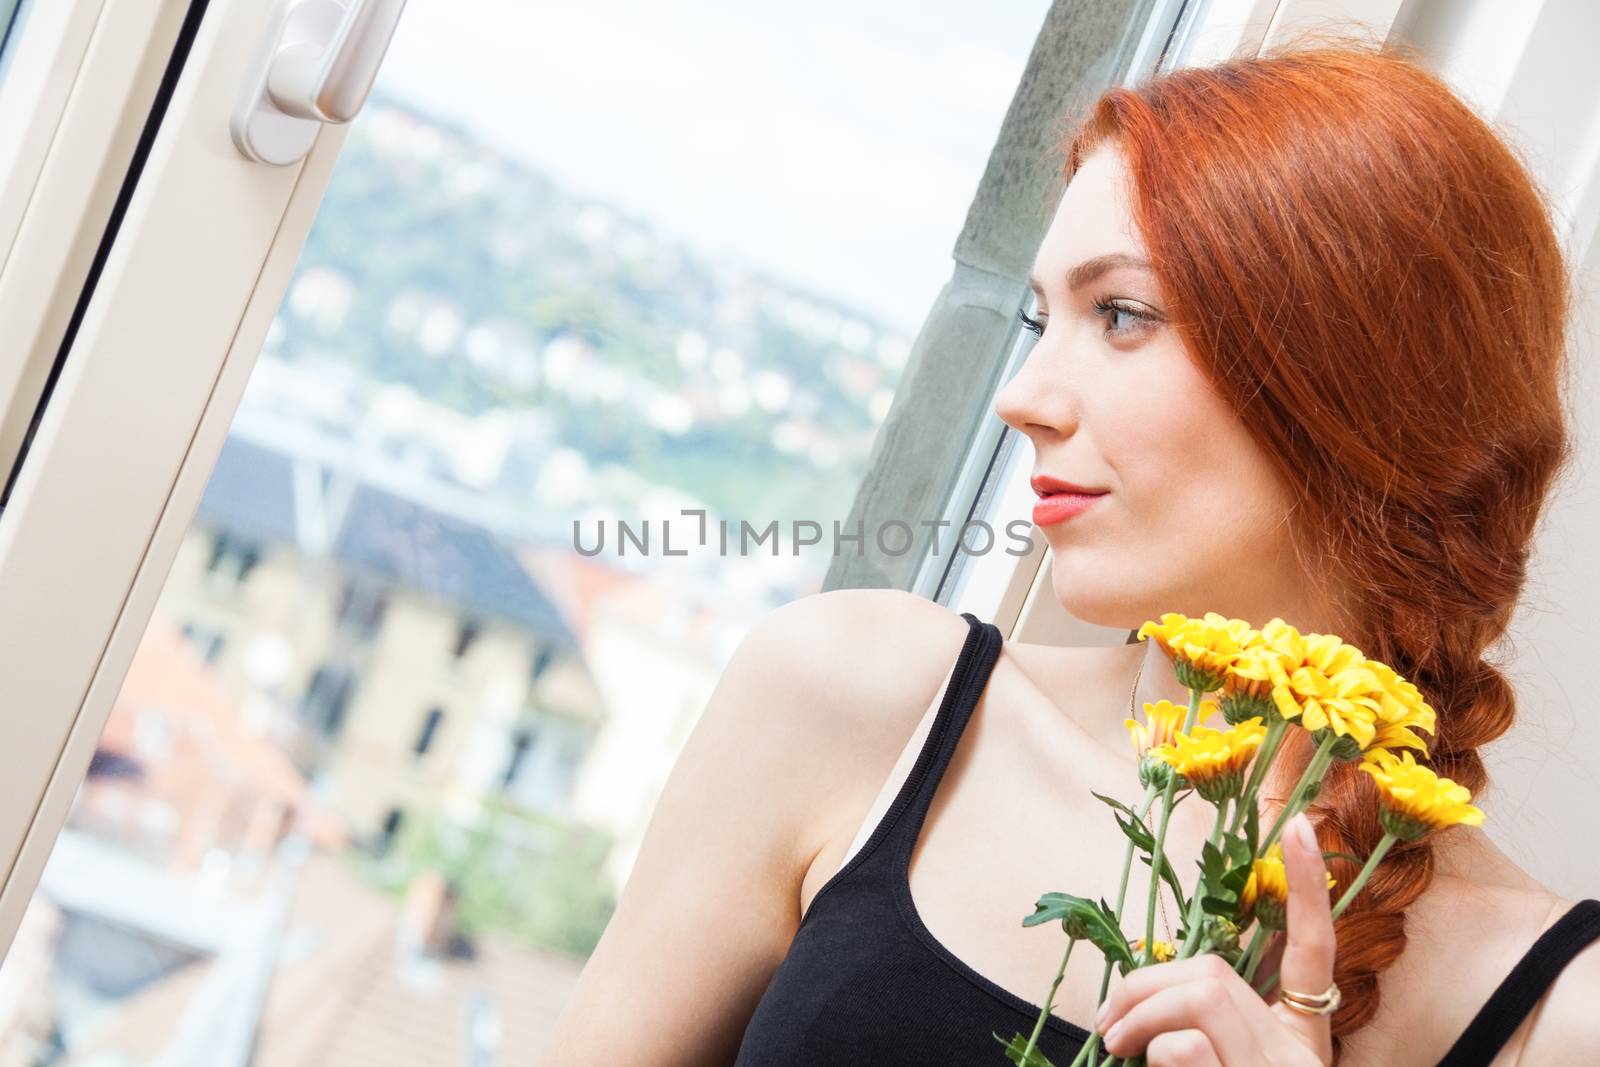 Close up Thoughtful Pretty Young Woman Holding Yellow Flowers, Looking Outside While Leaning on Glass Window.